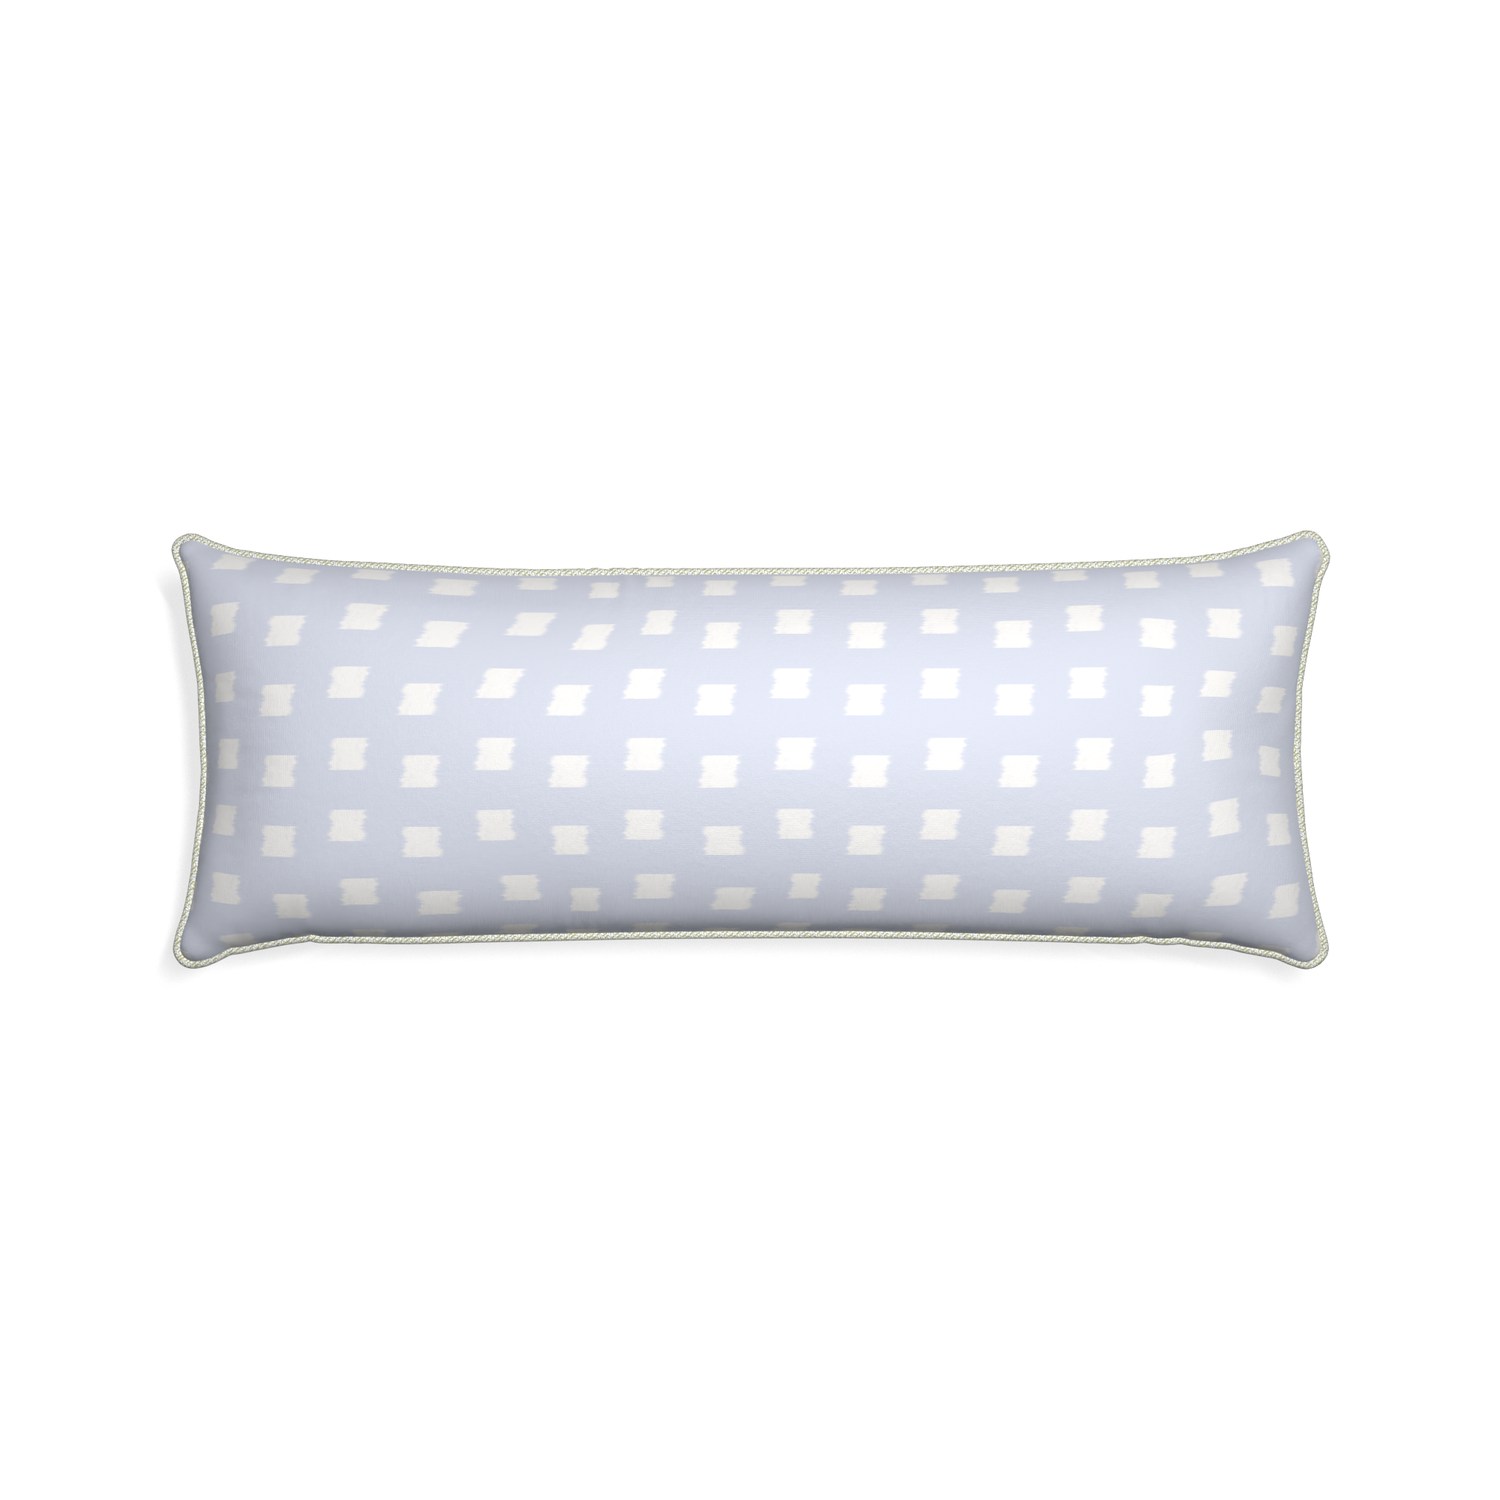 Xl-lumbar denton custom sky blue patternpillow with l piping on white background